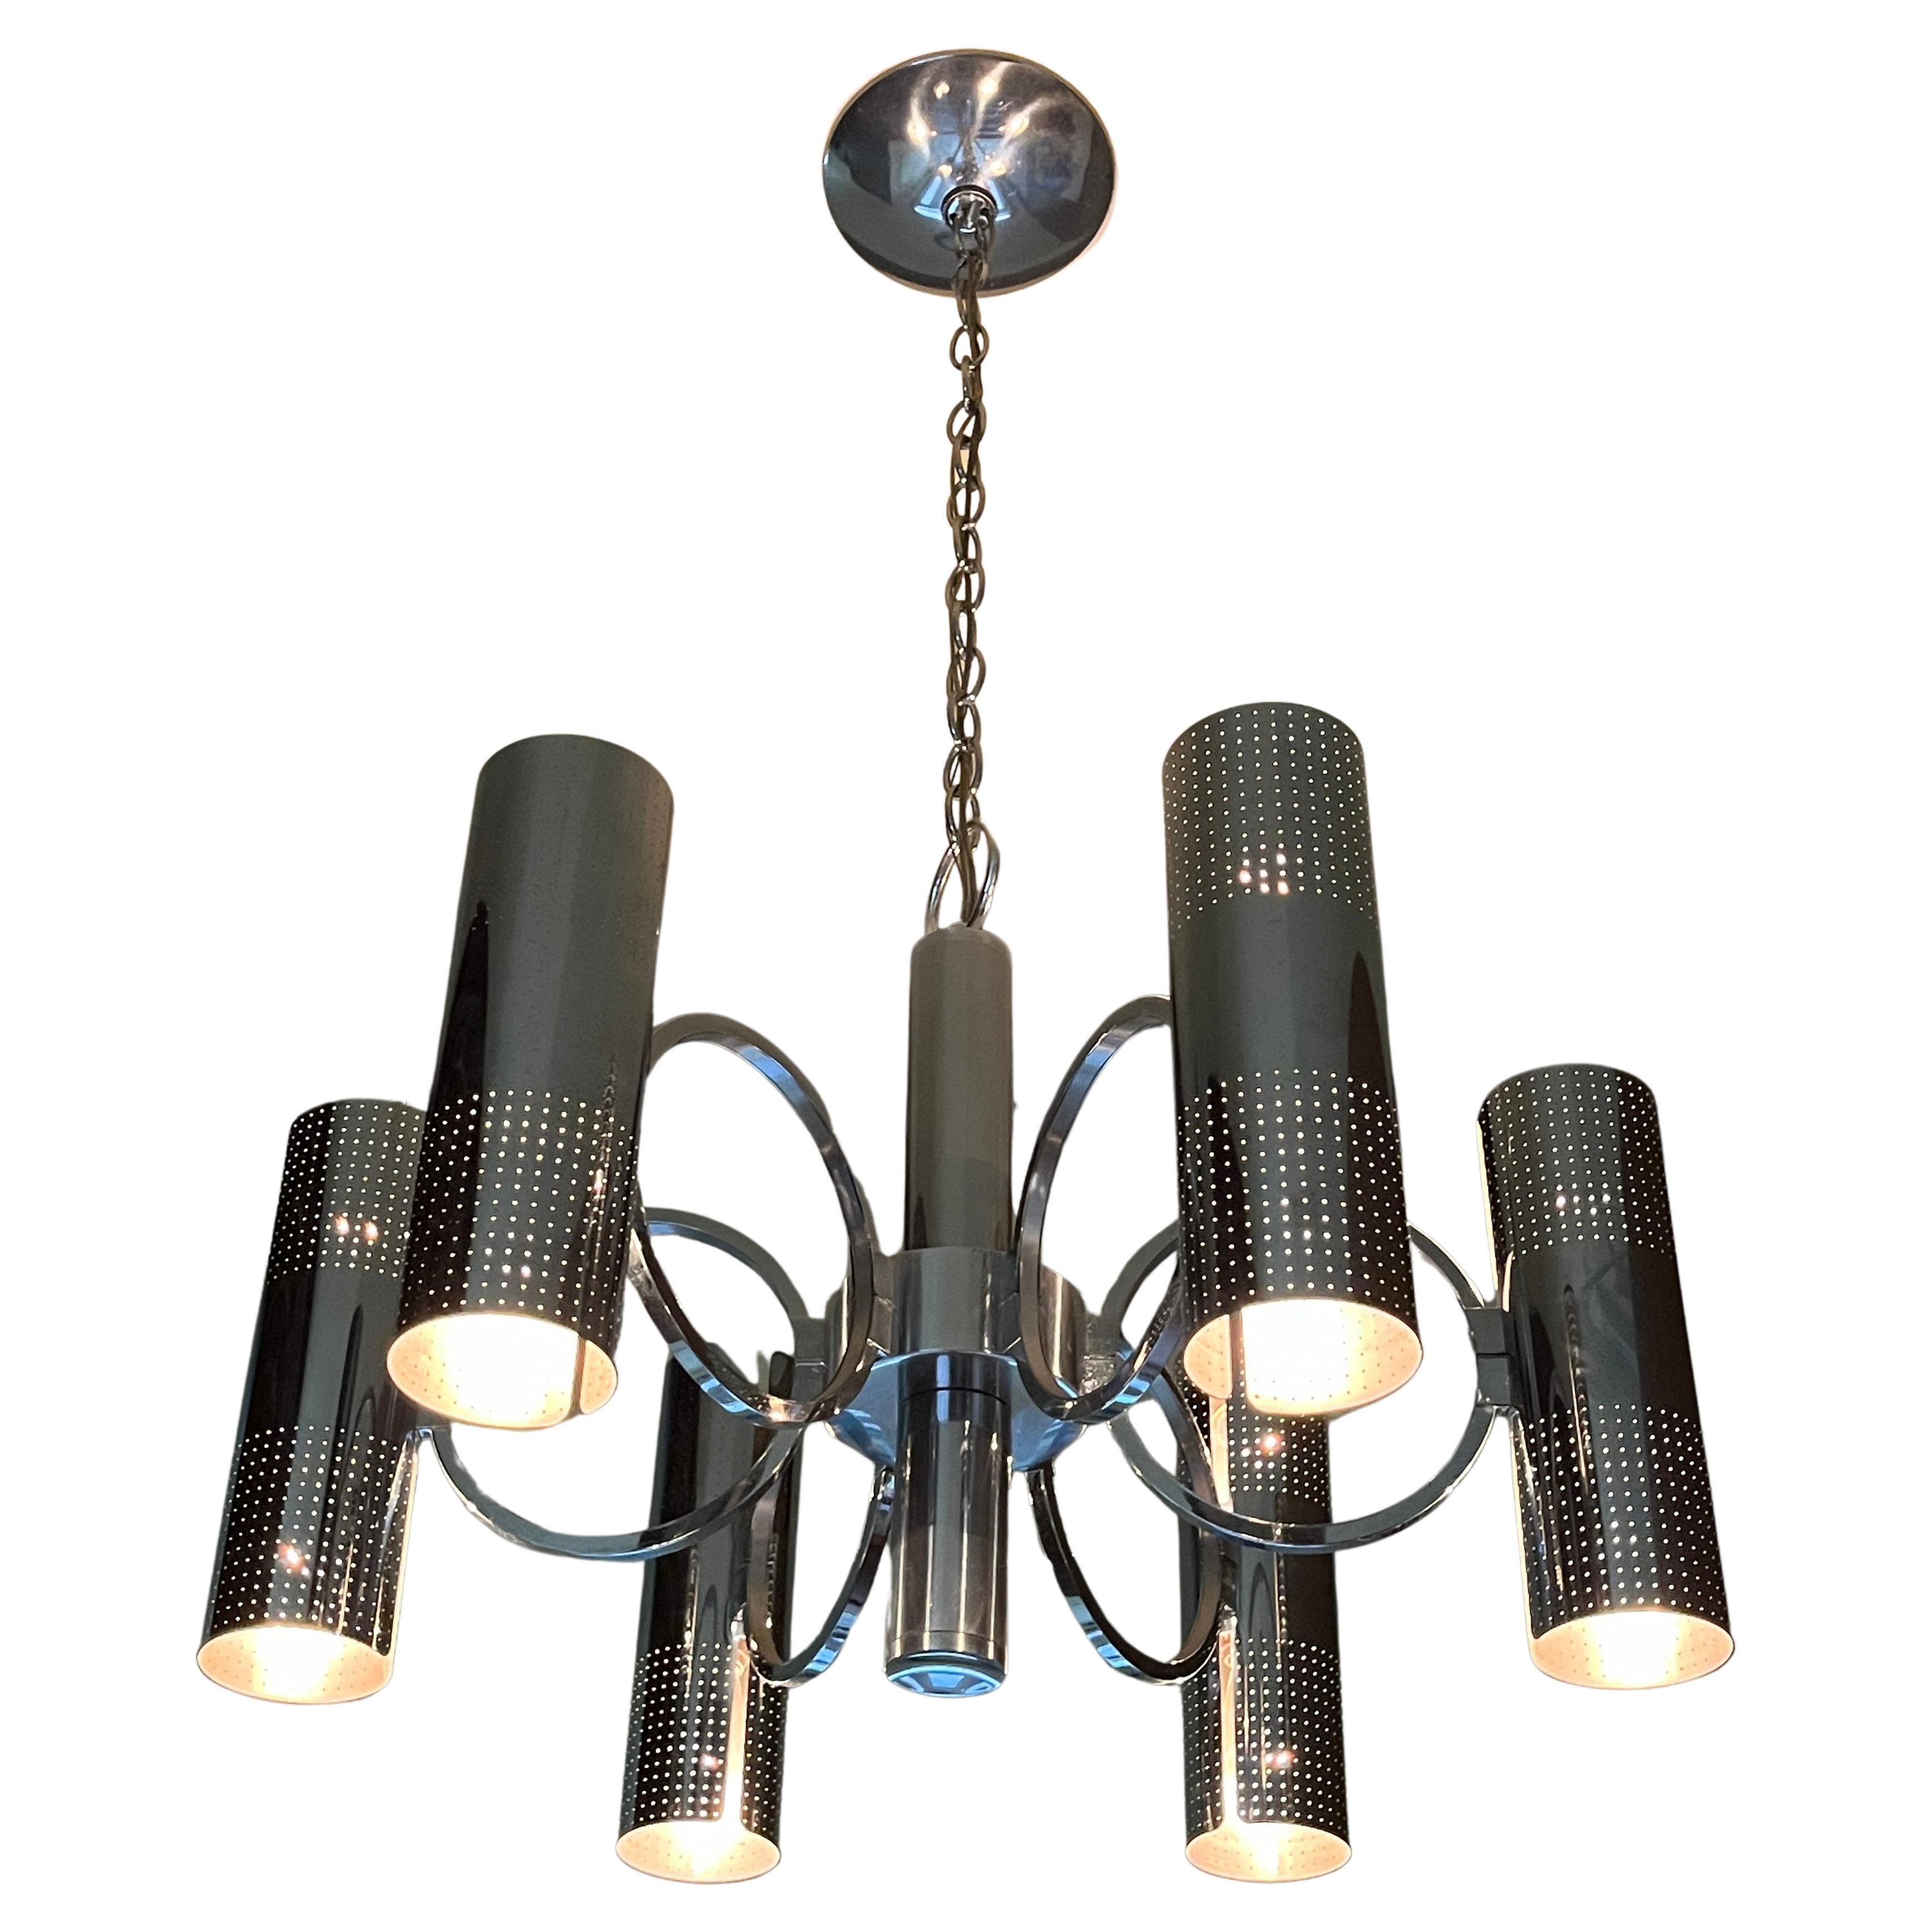 Beautiful eight art chandelier with canister light fixtures extending from circular arms. Each canister has pinhole perforations creating a dramatic experience. Lights face up and down. Chrome in excellent vintage condition. 